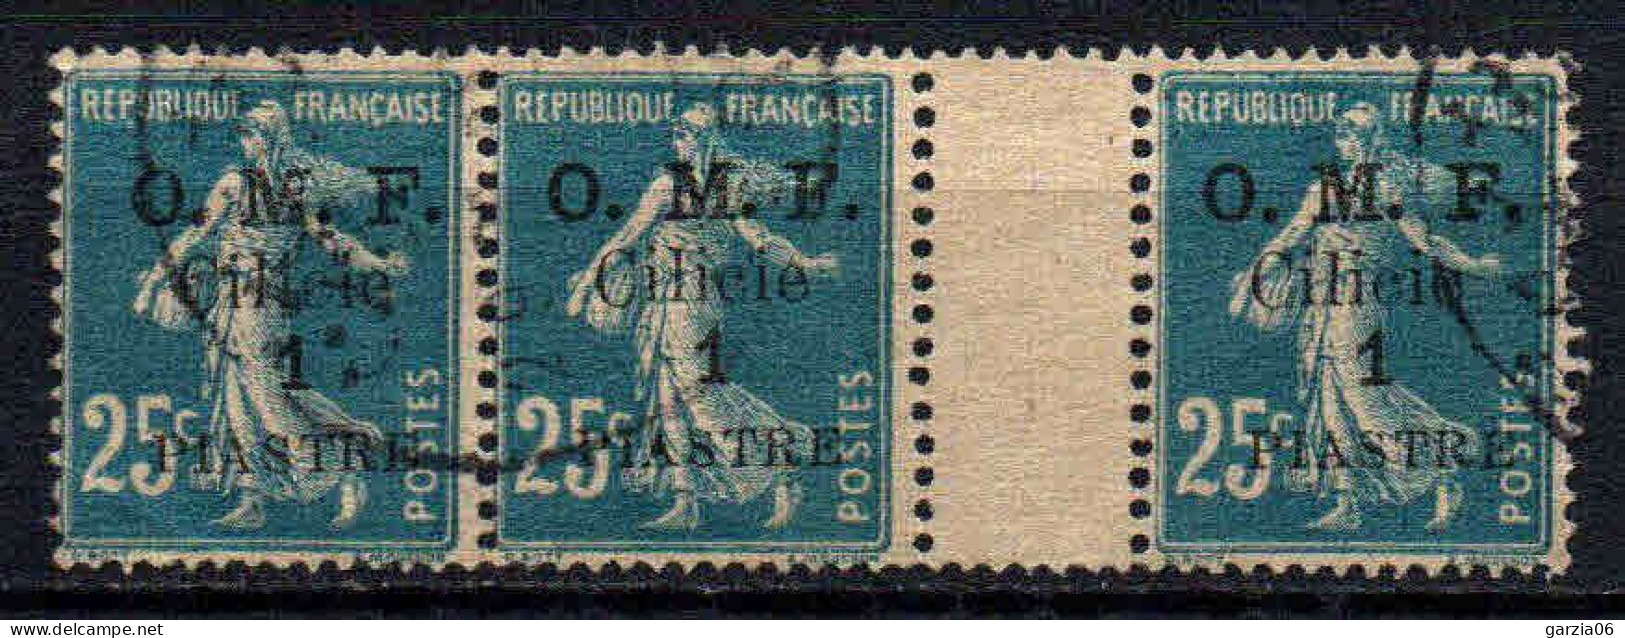 Cilicie  - 1920 - N°  92 Avec Pont  - Oblit - Used - Usati